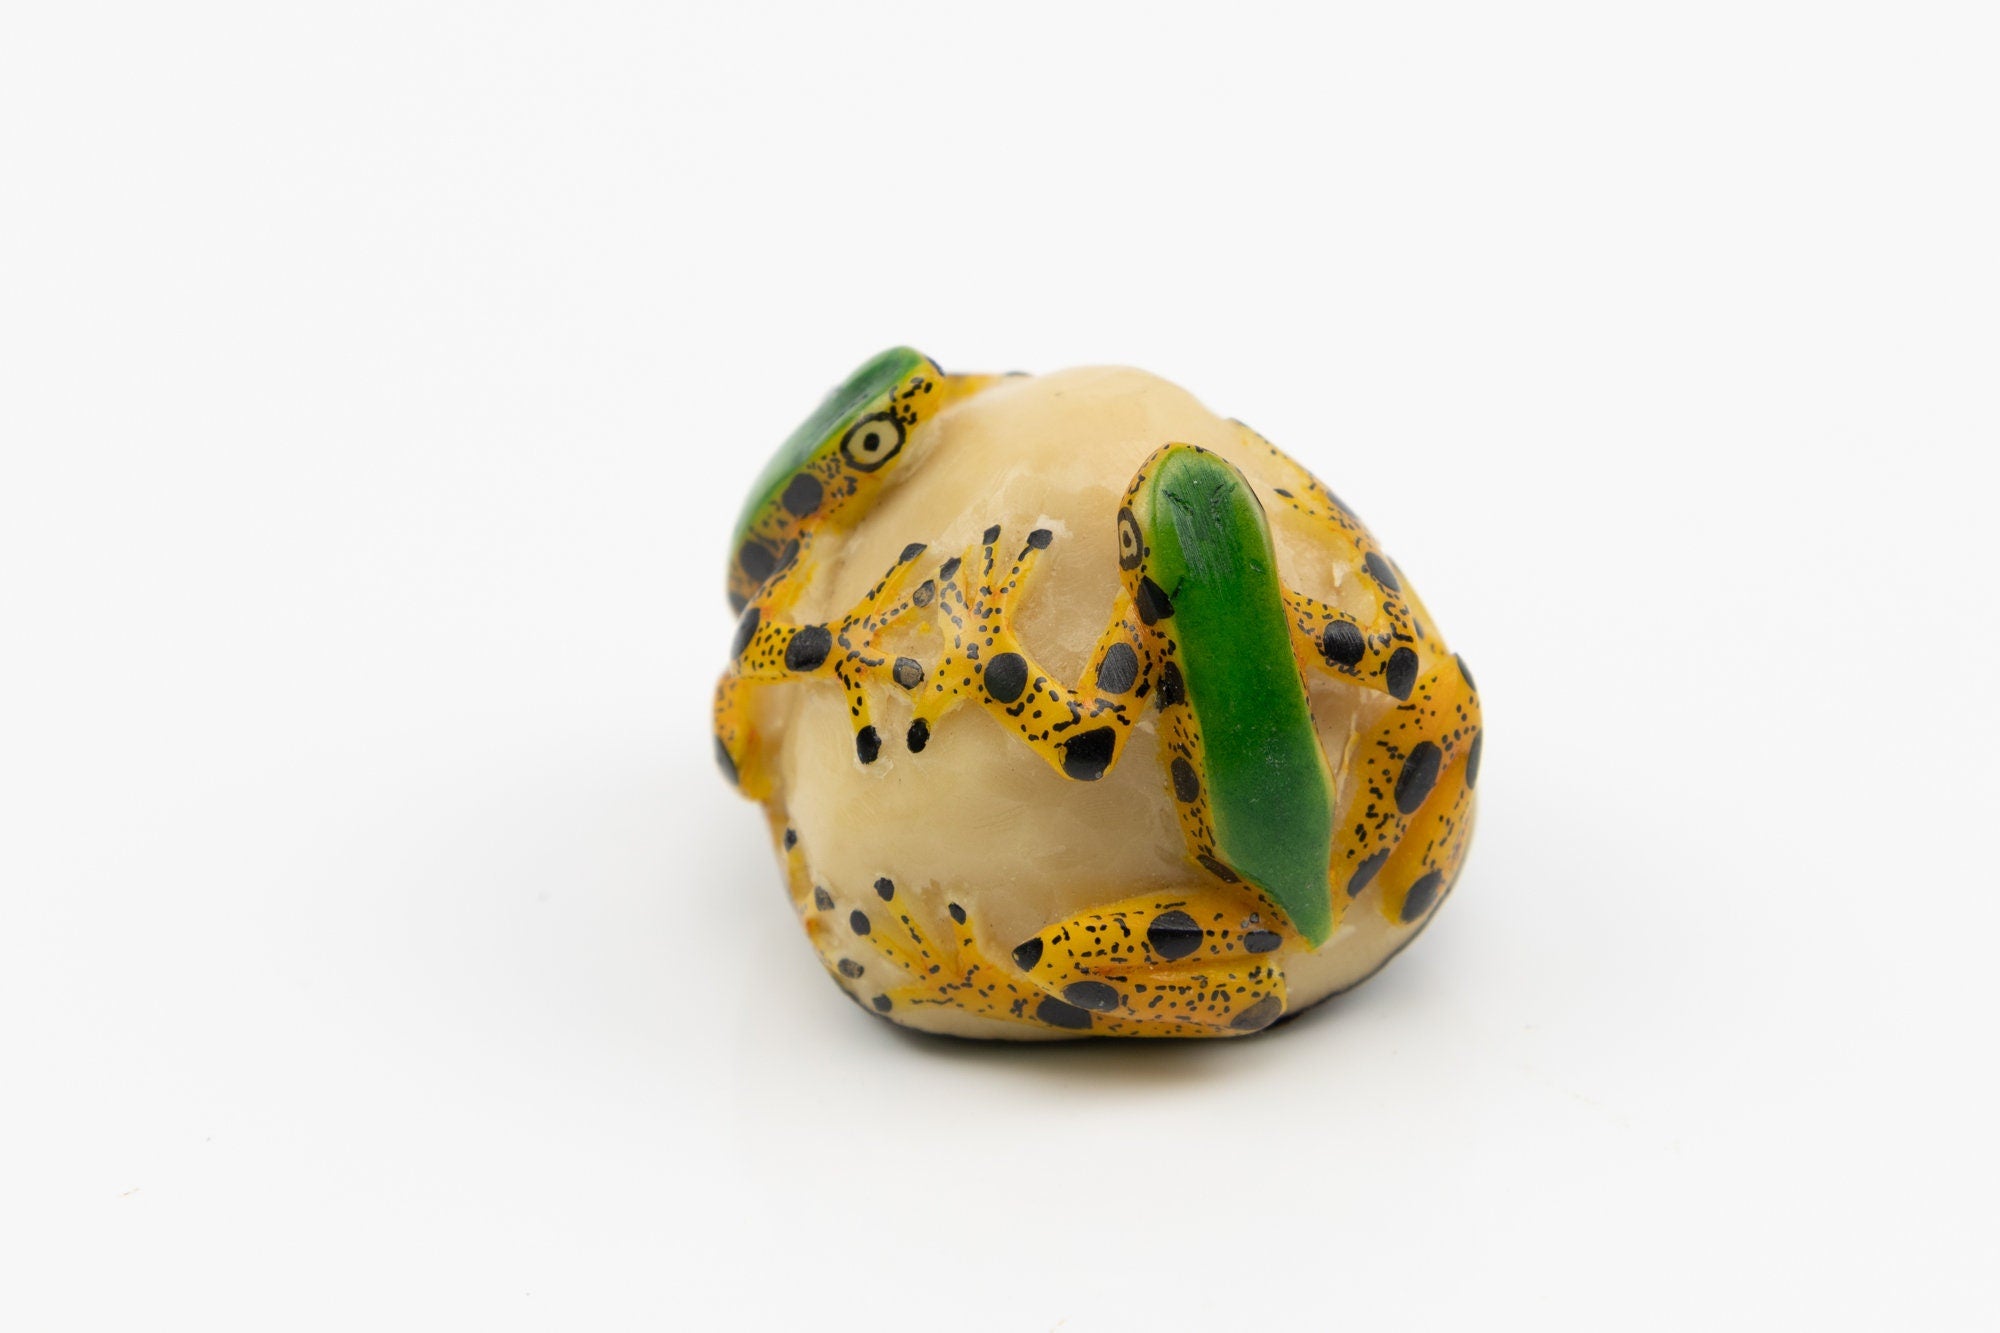 Hand Carved 2 Poison Dart Frog Tagua Nut Made By Wounaan And Emberá Panama Indians. Animal Statue, Carving Miniature, Figurine, Decoration